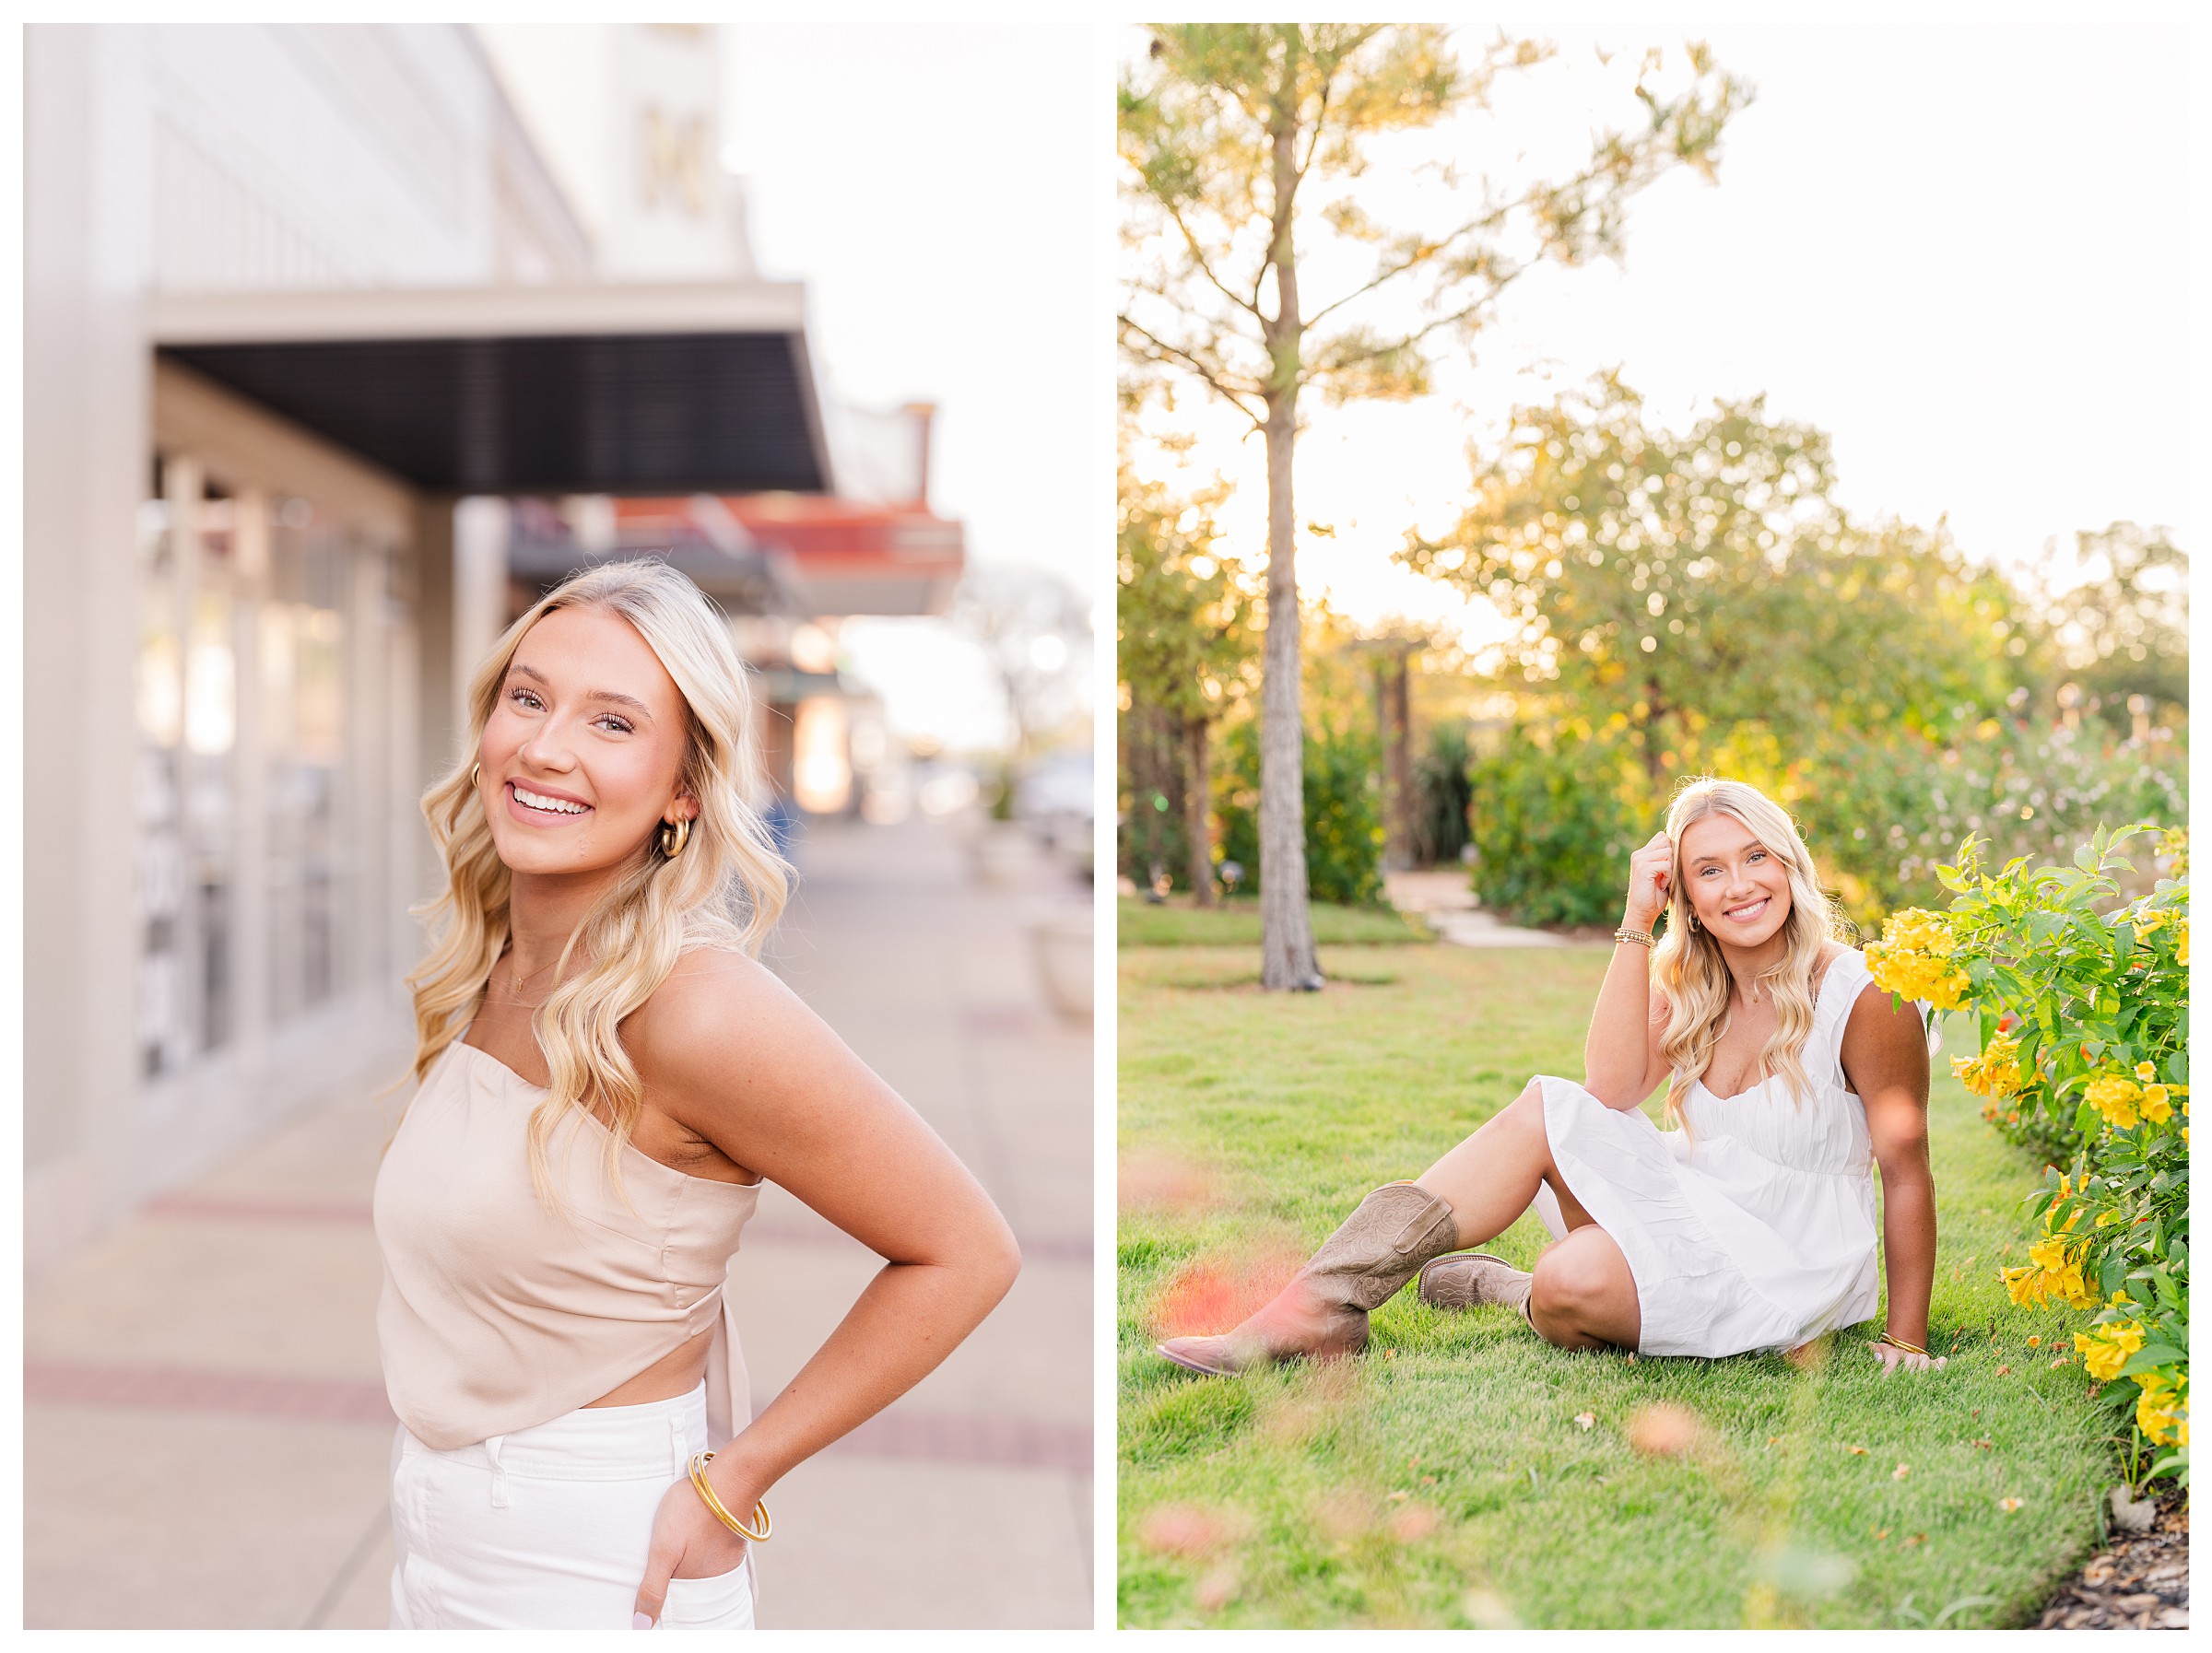 First image is of girl with hands in back pocket and smiling while turned to the side and wearing a pink top with white pants in the middle of Downtown Bryan. Second image is of girl sitting in grass and leaning elbow on knee with hand in hair and smiling at camera surrounded by flowers at sunset.